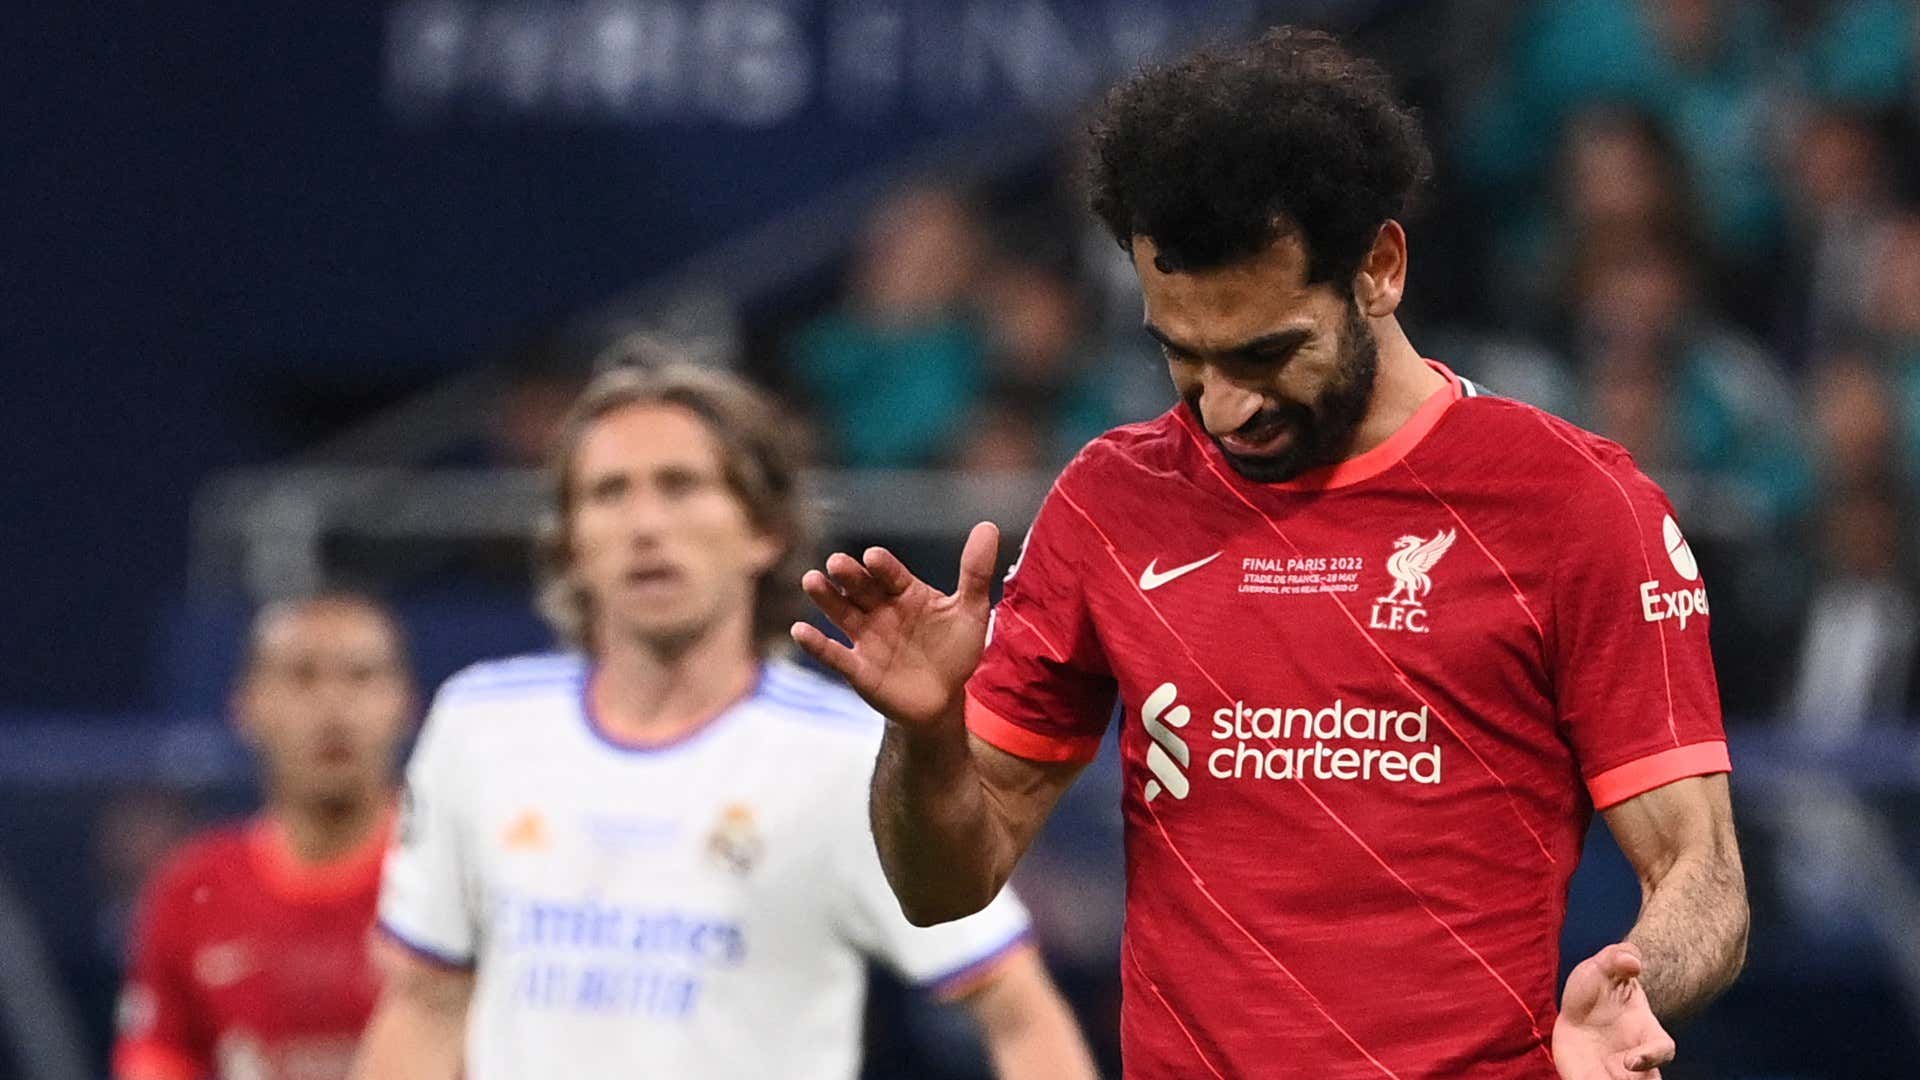 Mohamed Salah Liverpool Real Madrid Champions League final 2022